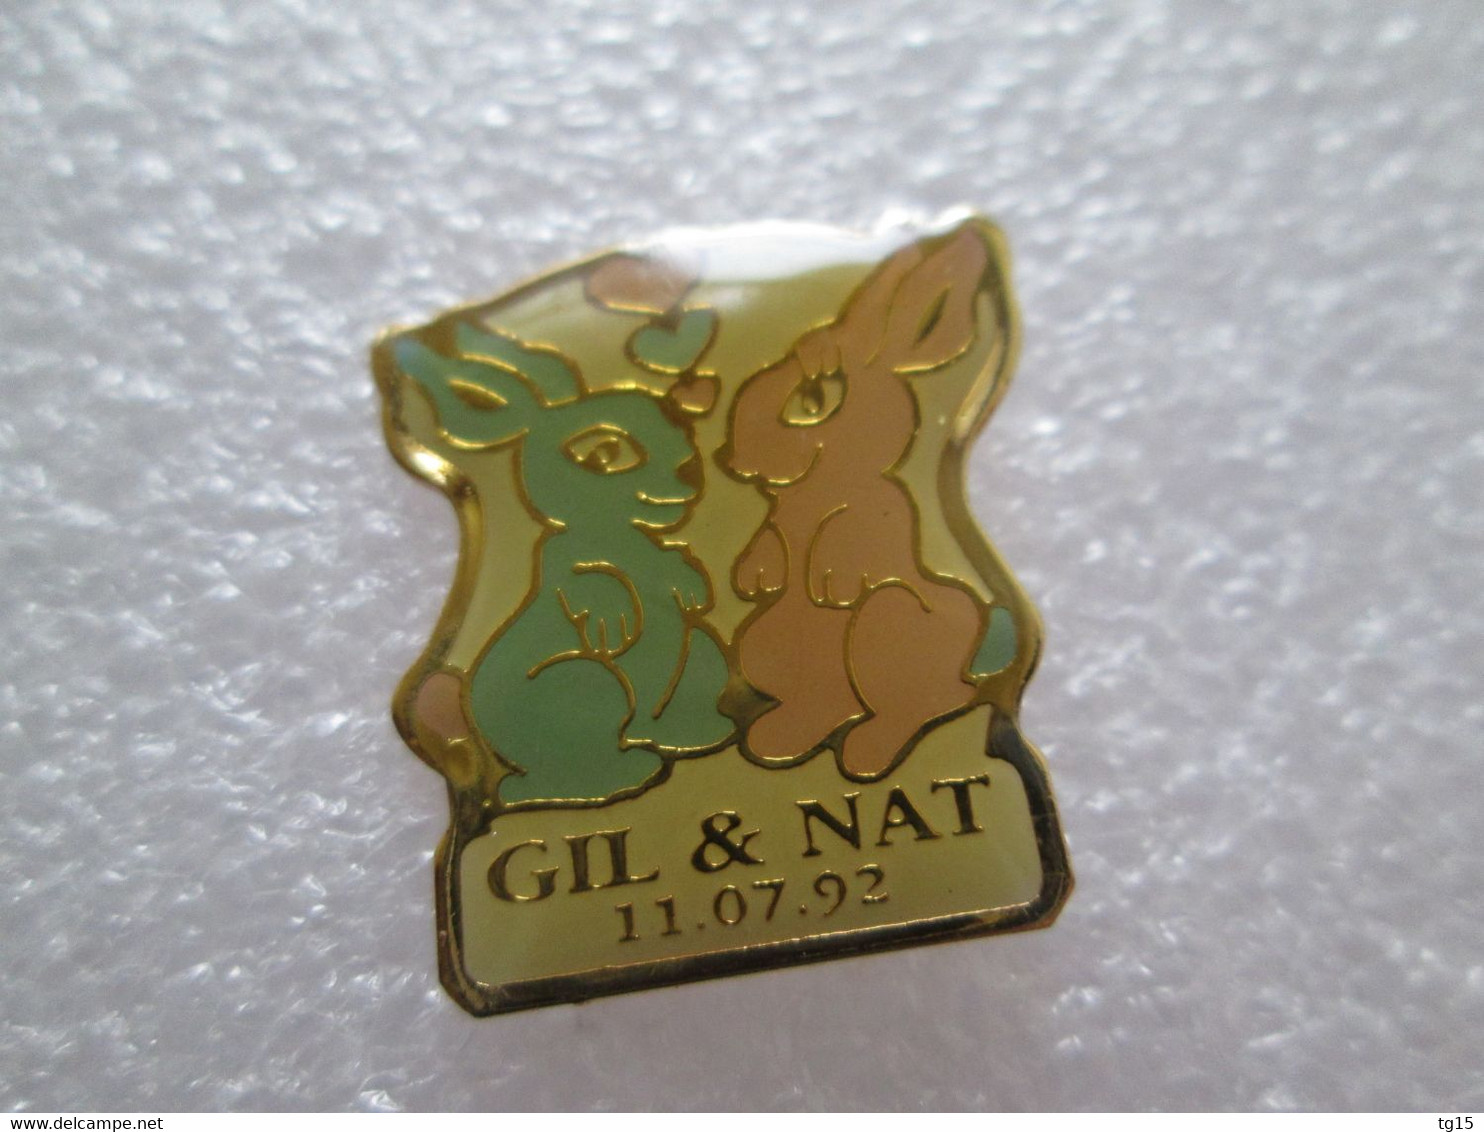 PIN'S    GIL  ET  NAT   11 07  92  LAPINS - Animaux